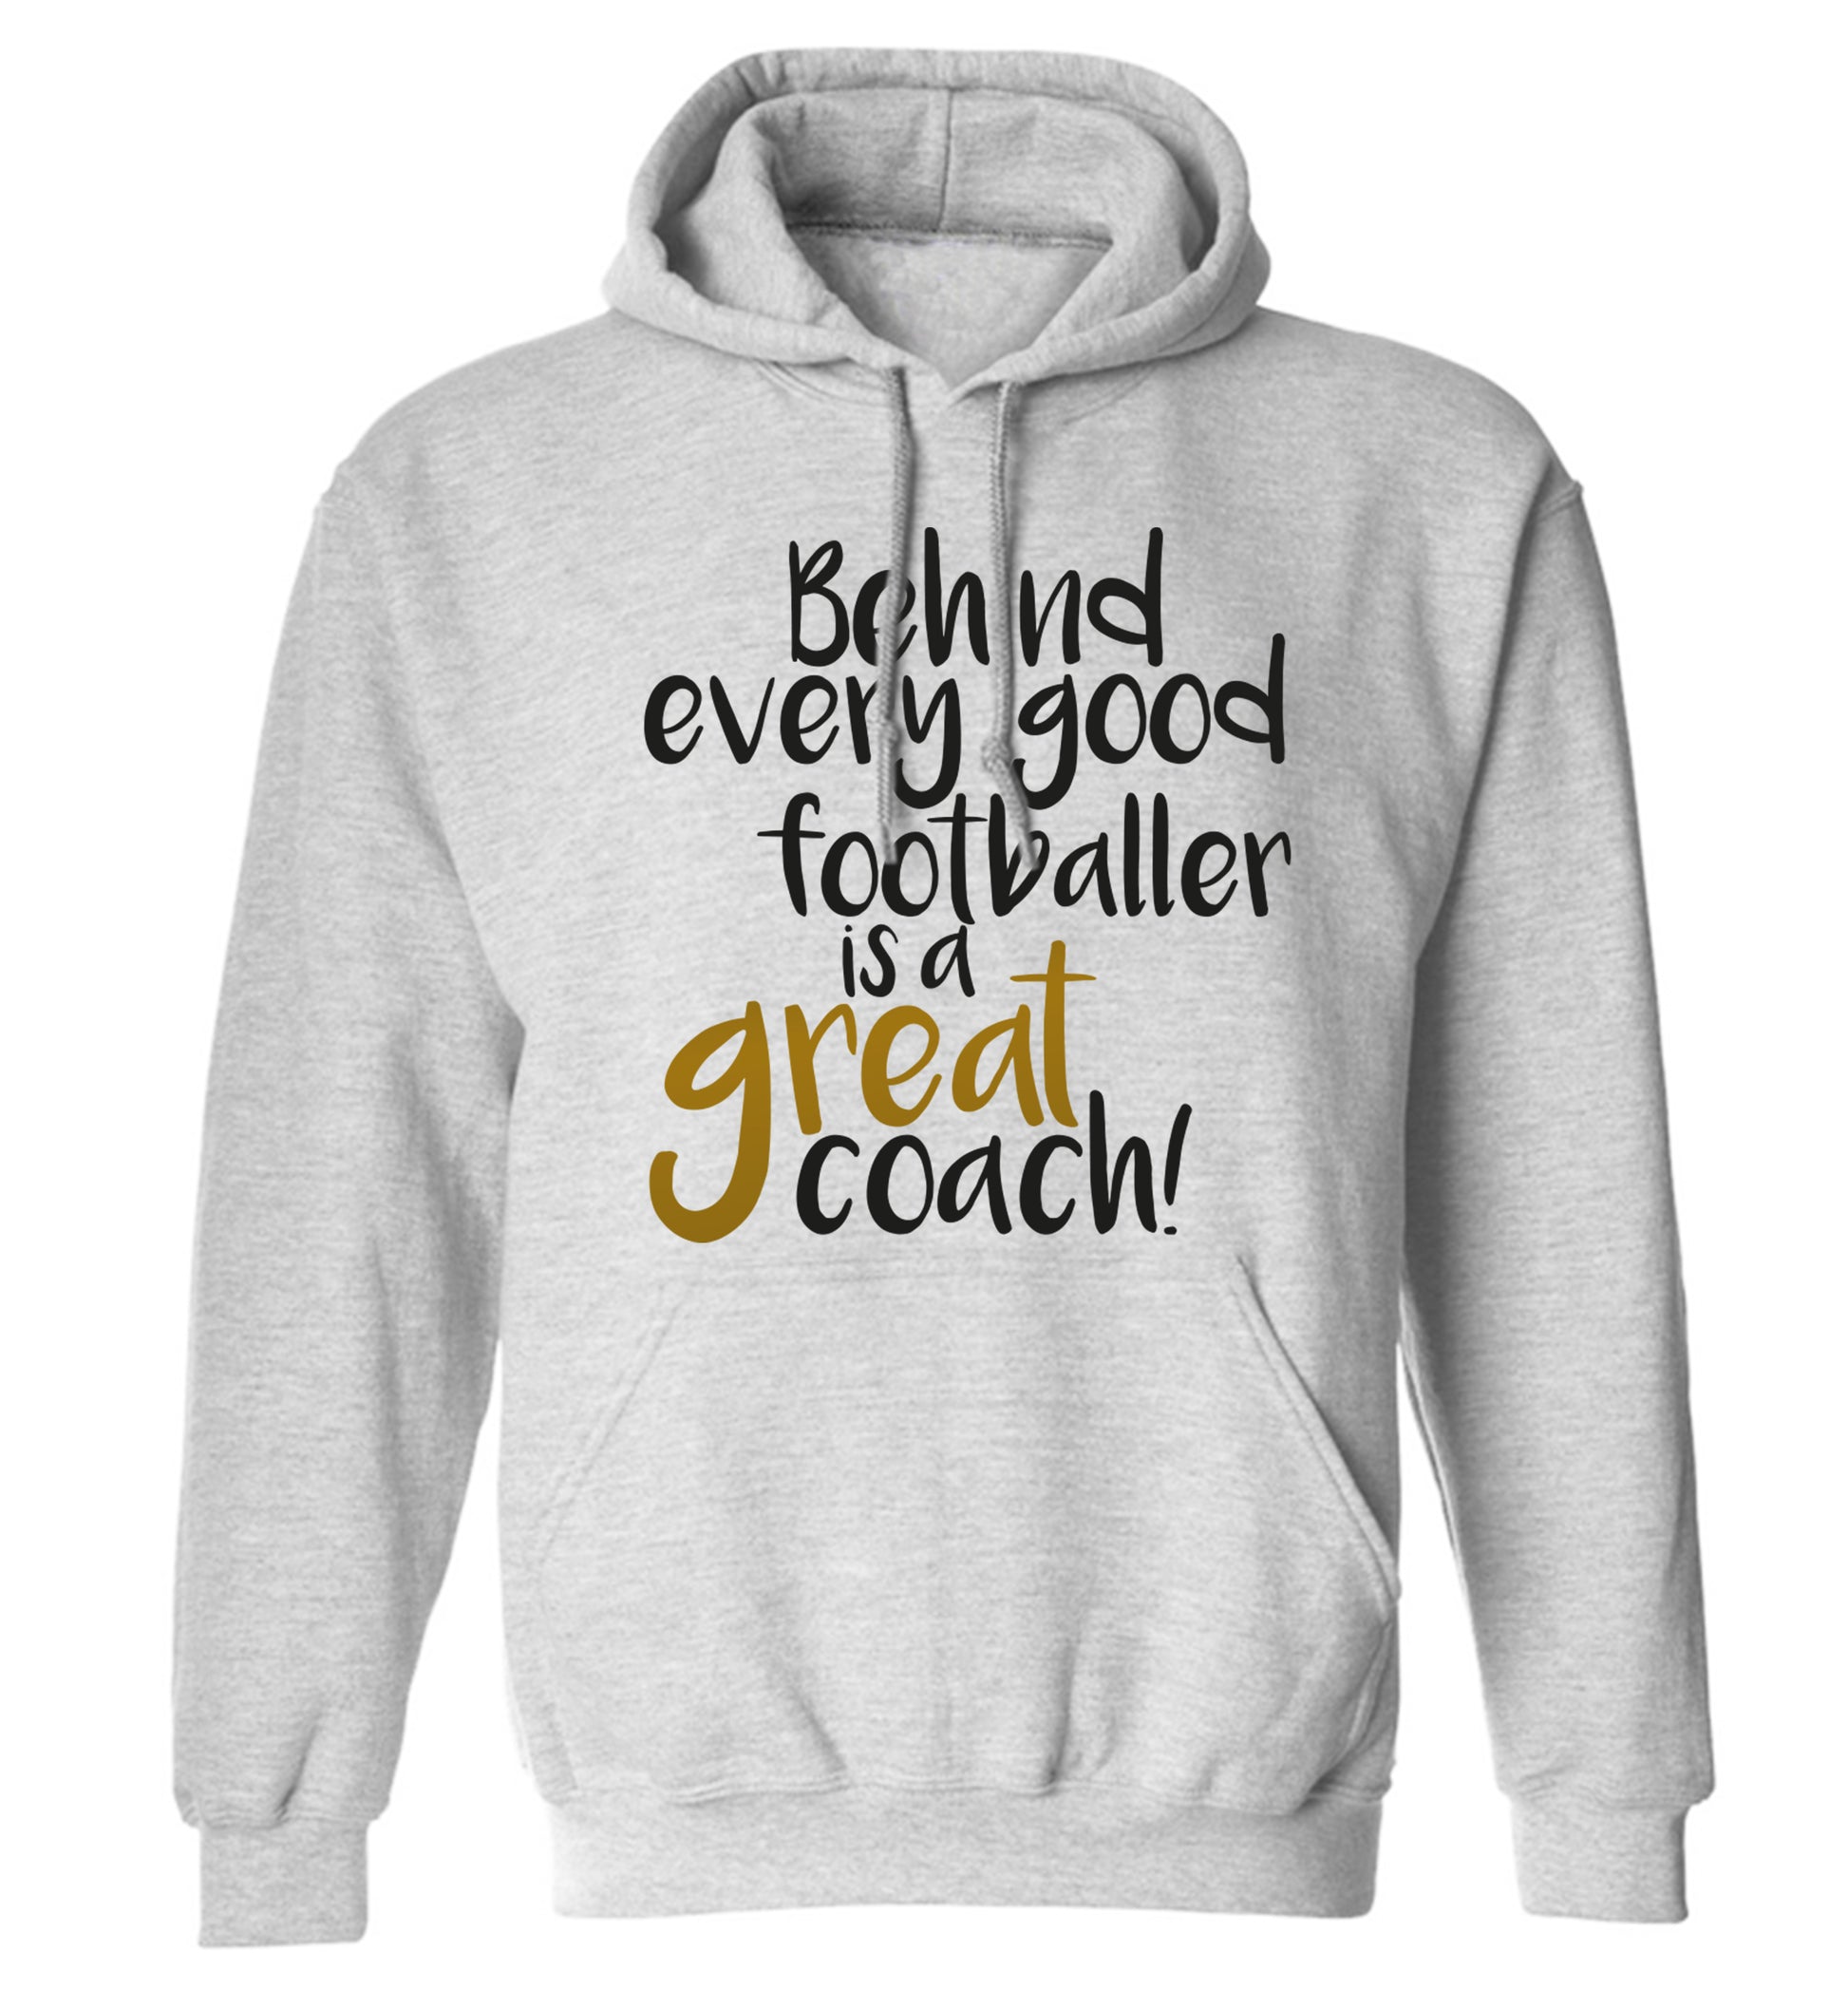 Behind every good footballer is a great coach! adults unisexgrey hoodie 2XL